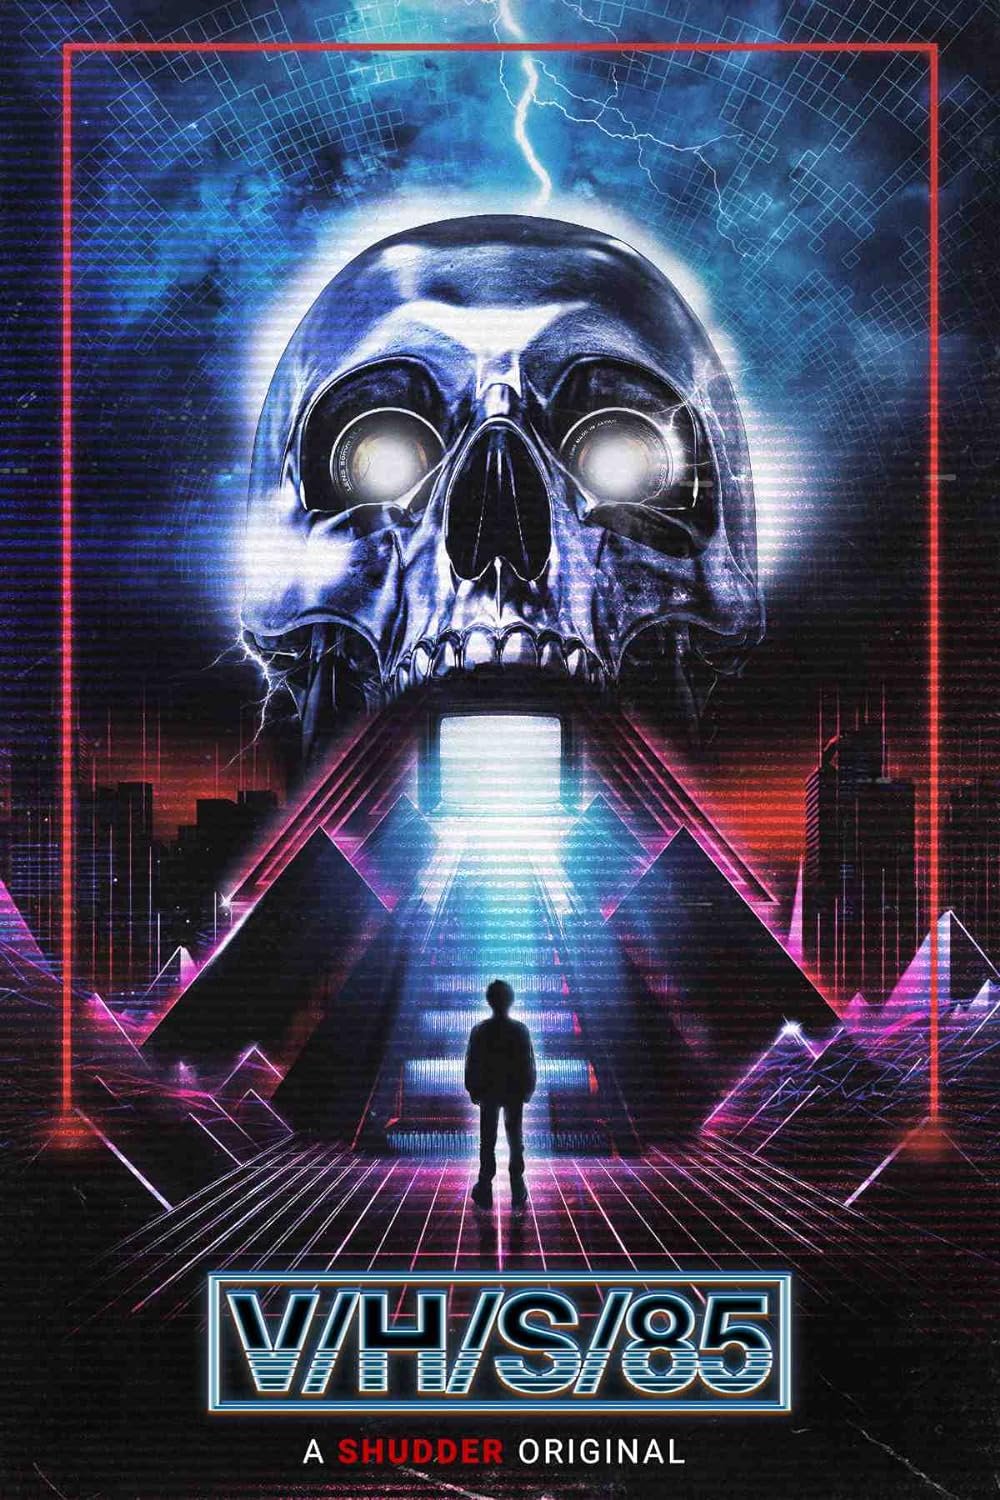 Poster of the movie V/H/S/85